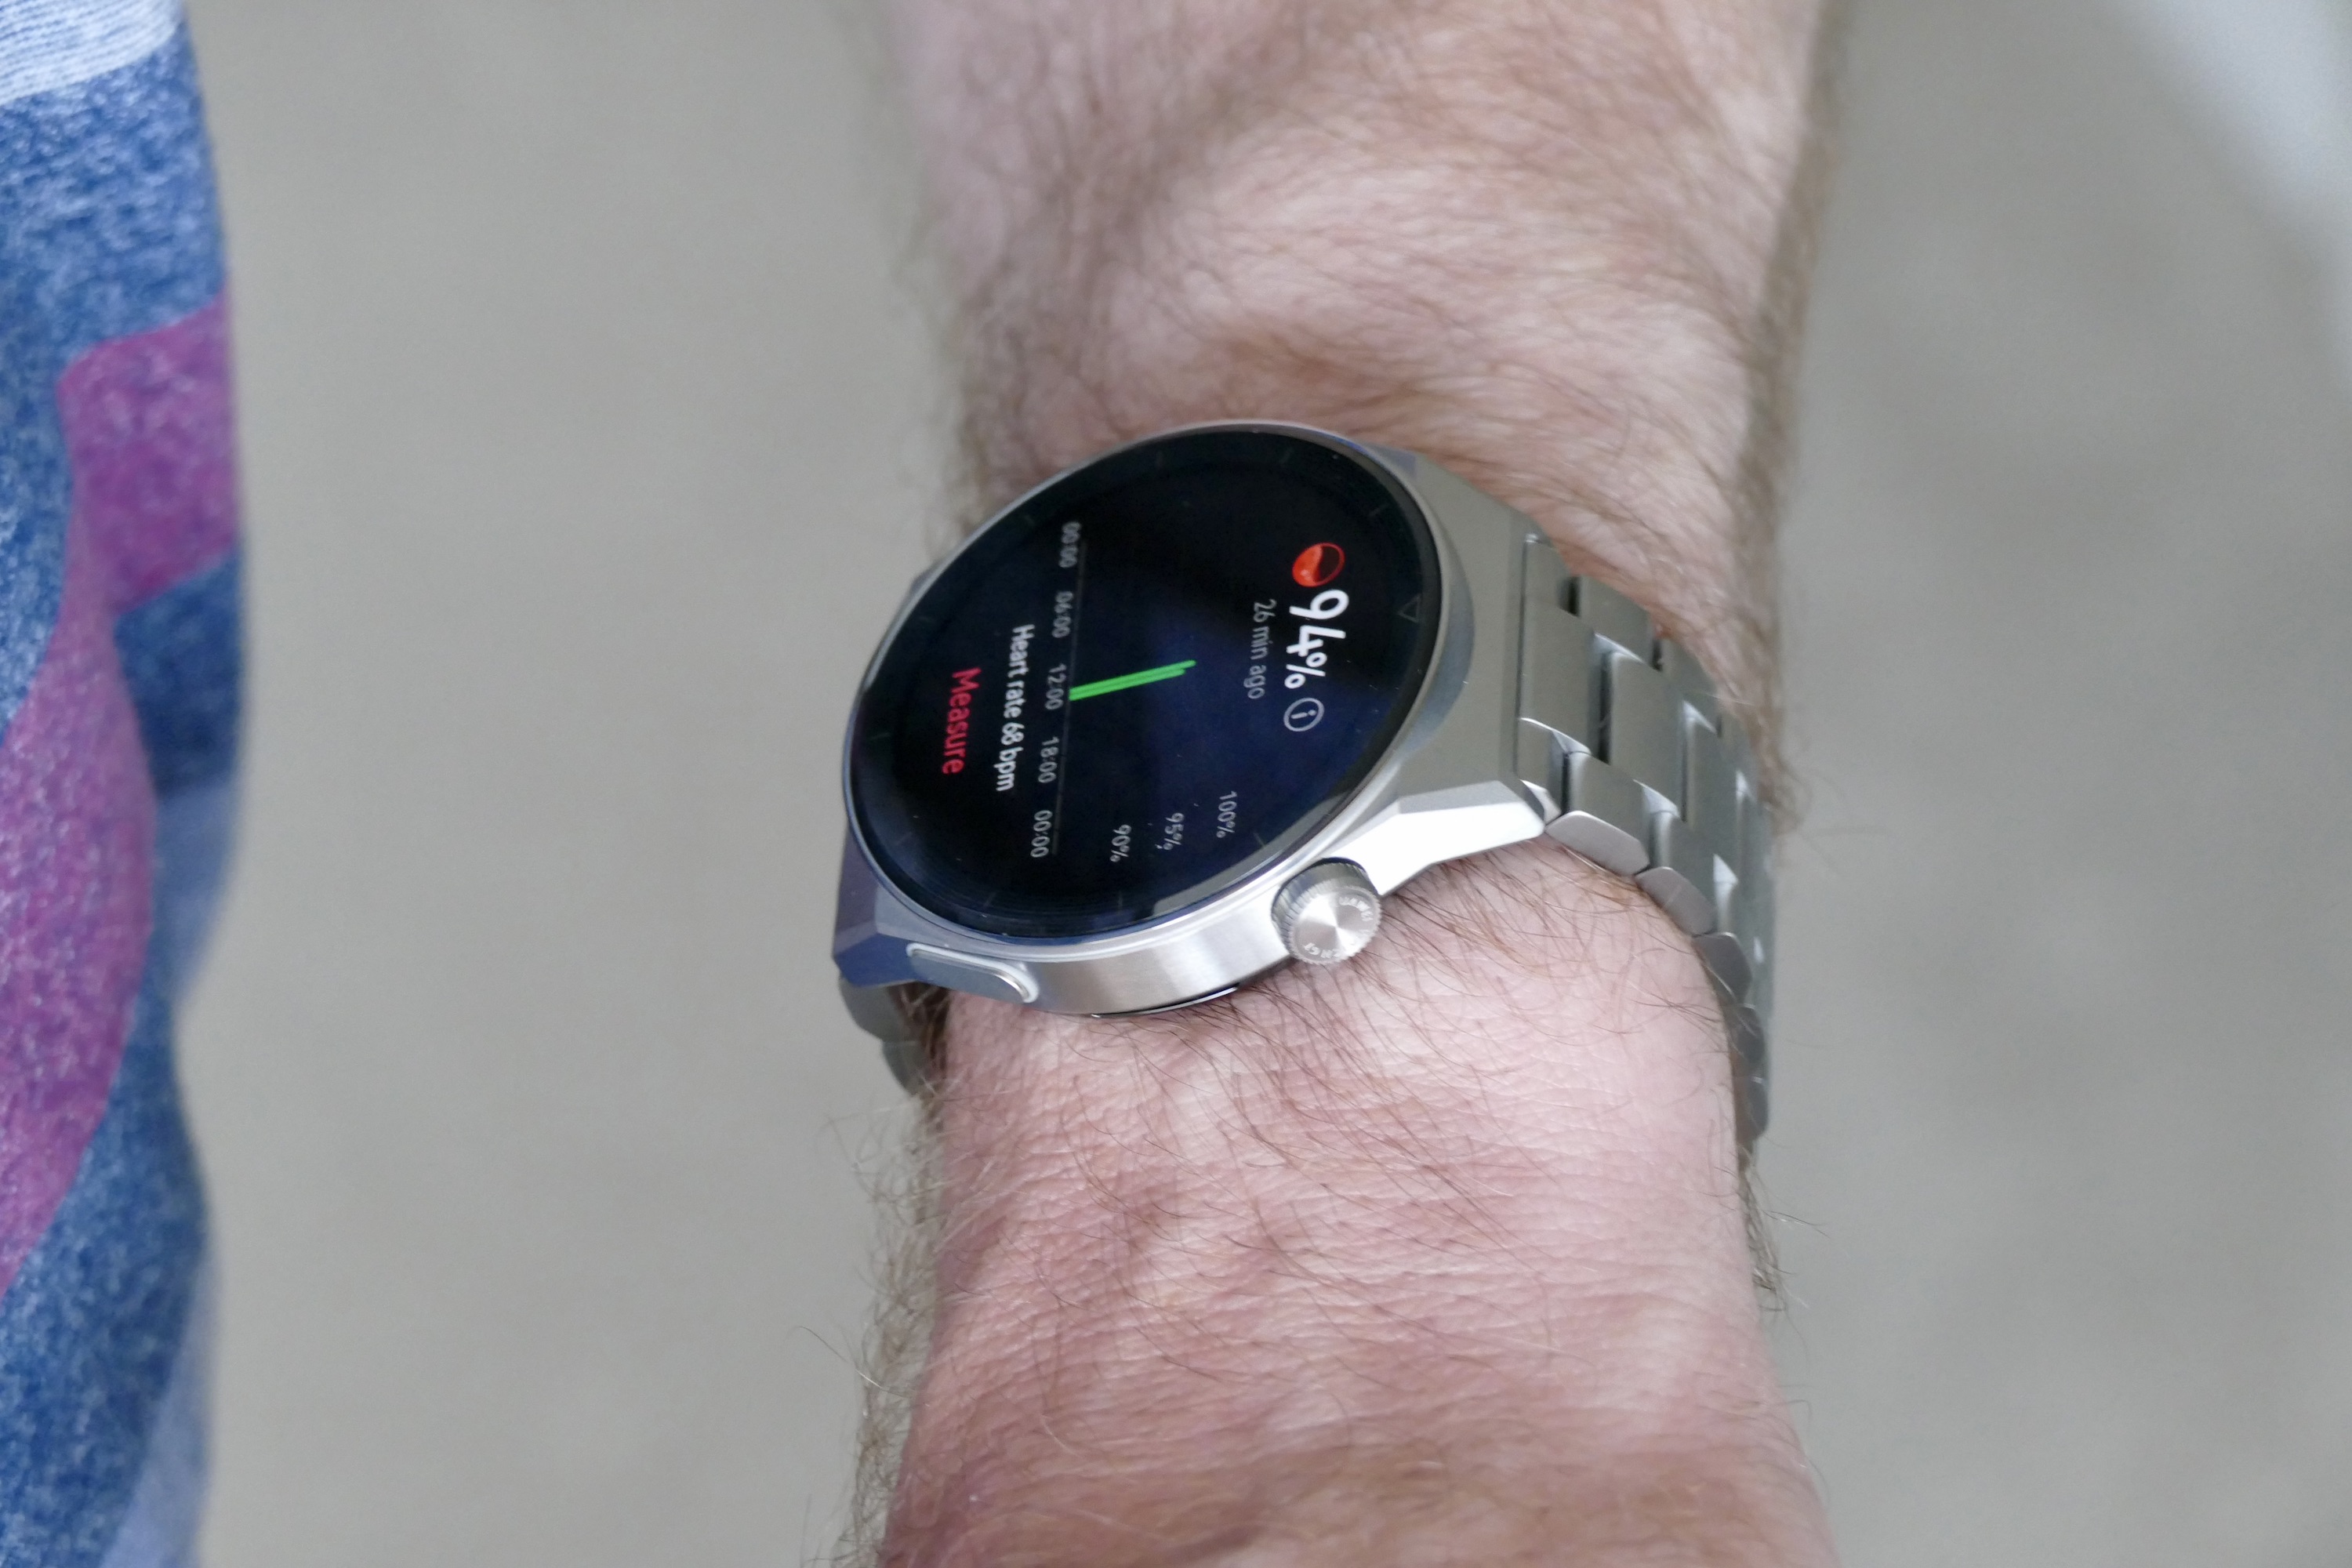 SP02 reading on the Huawei Watch GT 3 Pro.